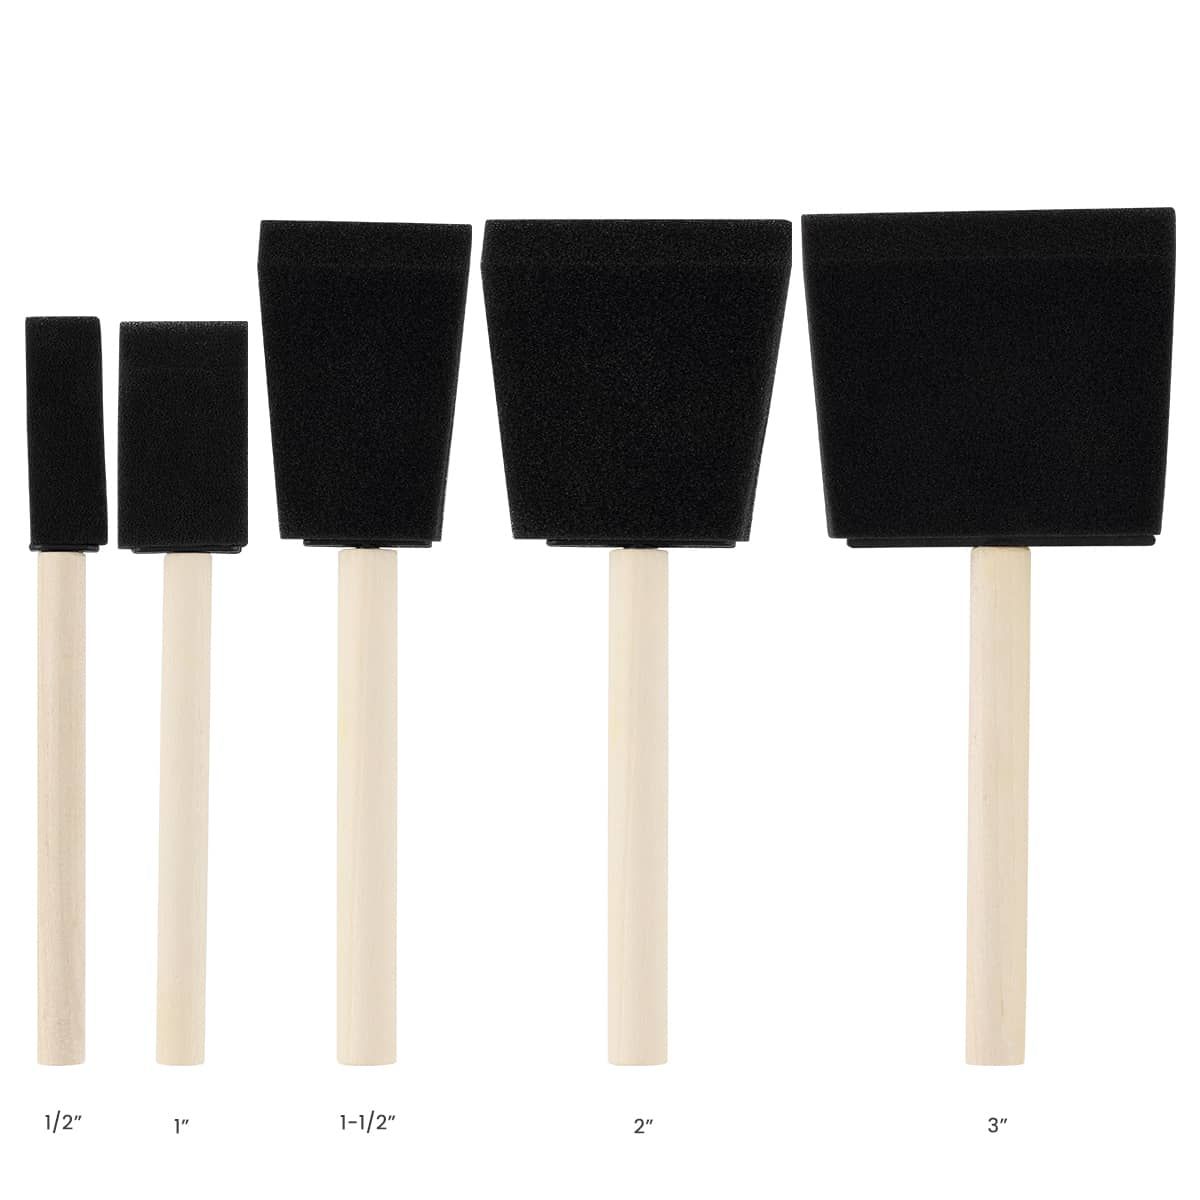 Creative Mark Round Chubby Paint Brush for Kids 10 Pk – Jerrys Artist Outlet